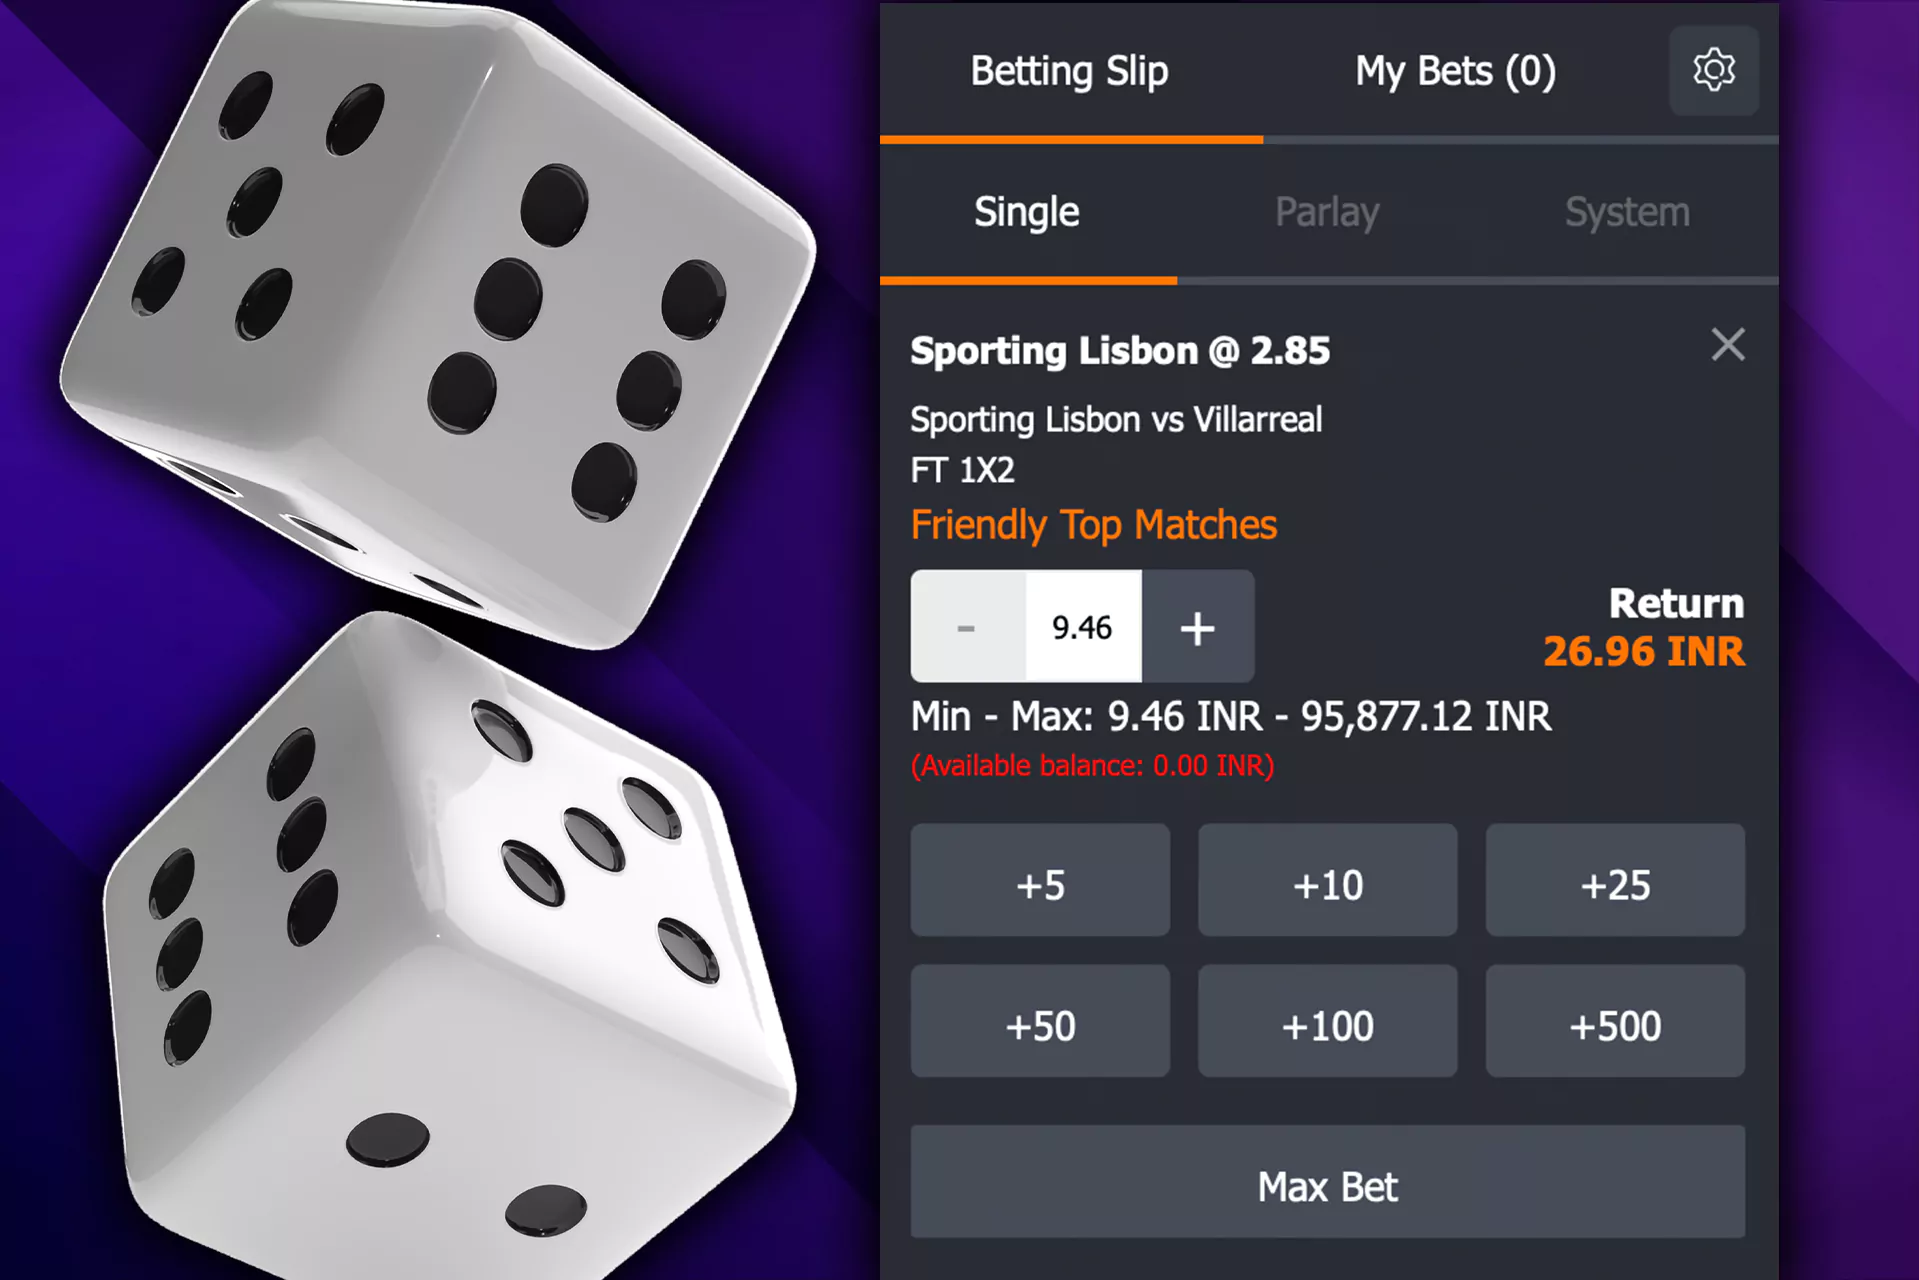 Place single betsif you are new at betting.